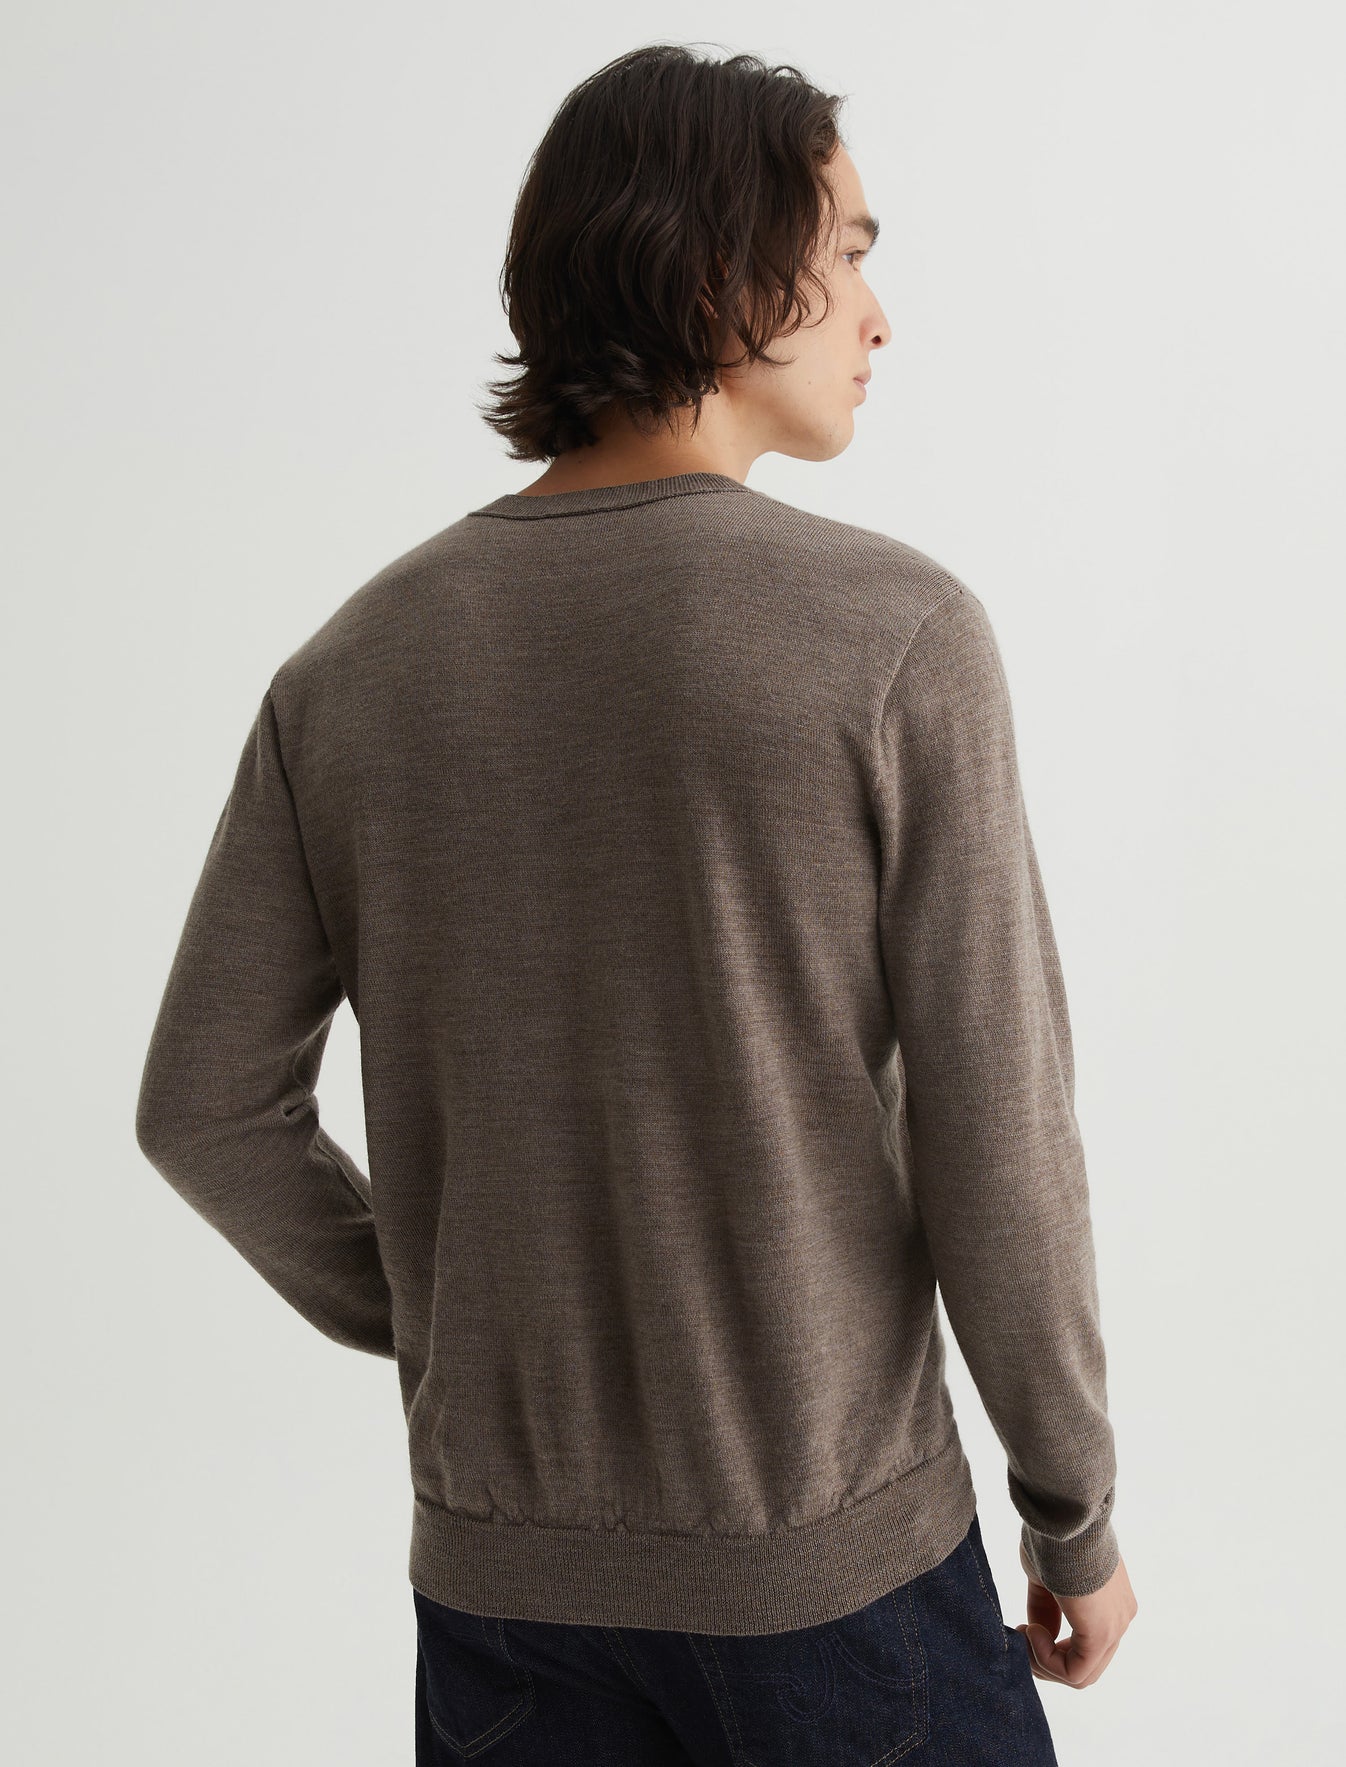 Beck Vee Melange Taupe Classic Fit Long Sleeve Vee Neck Sweater Mens Top Photo 6